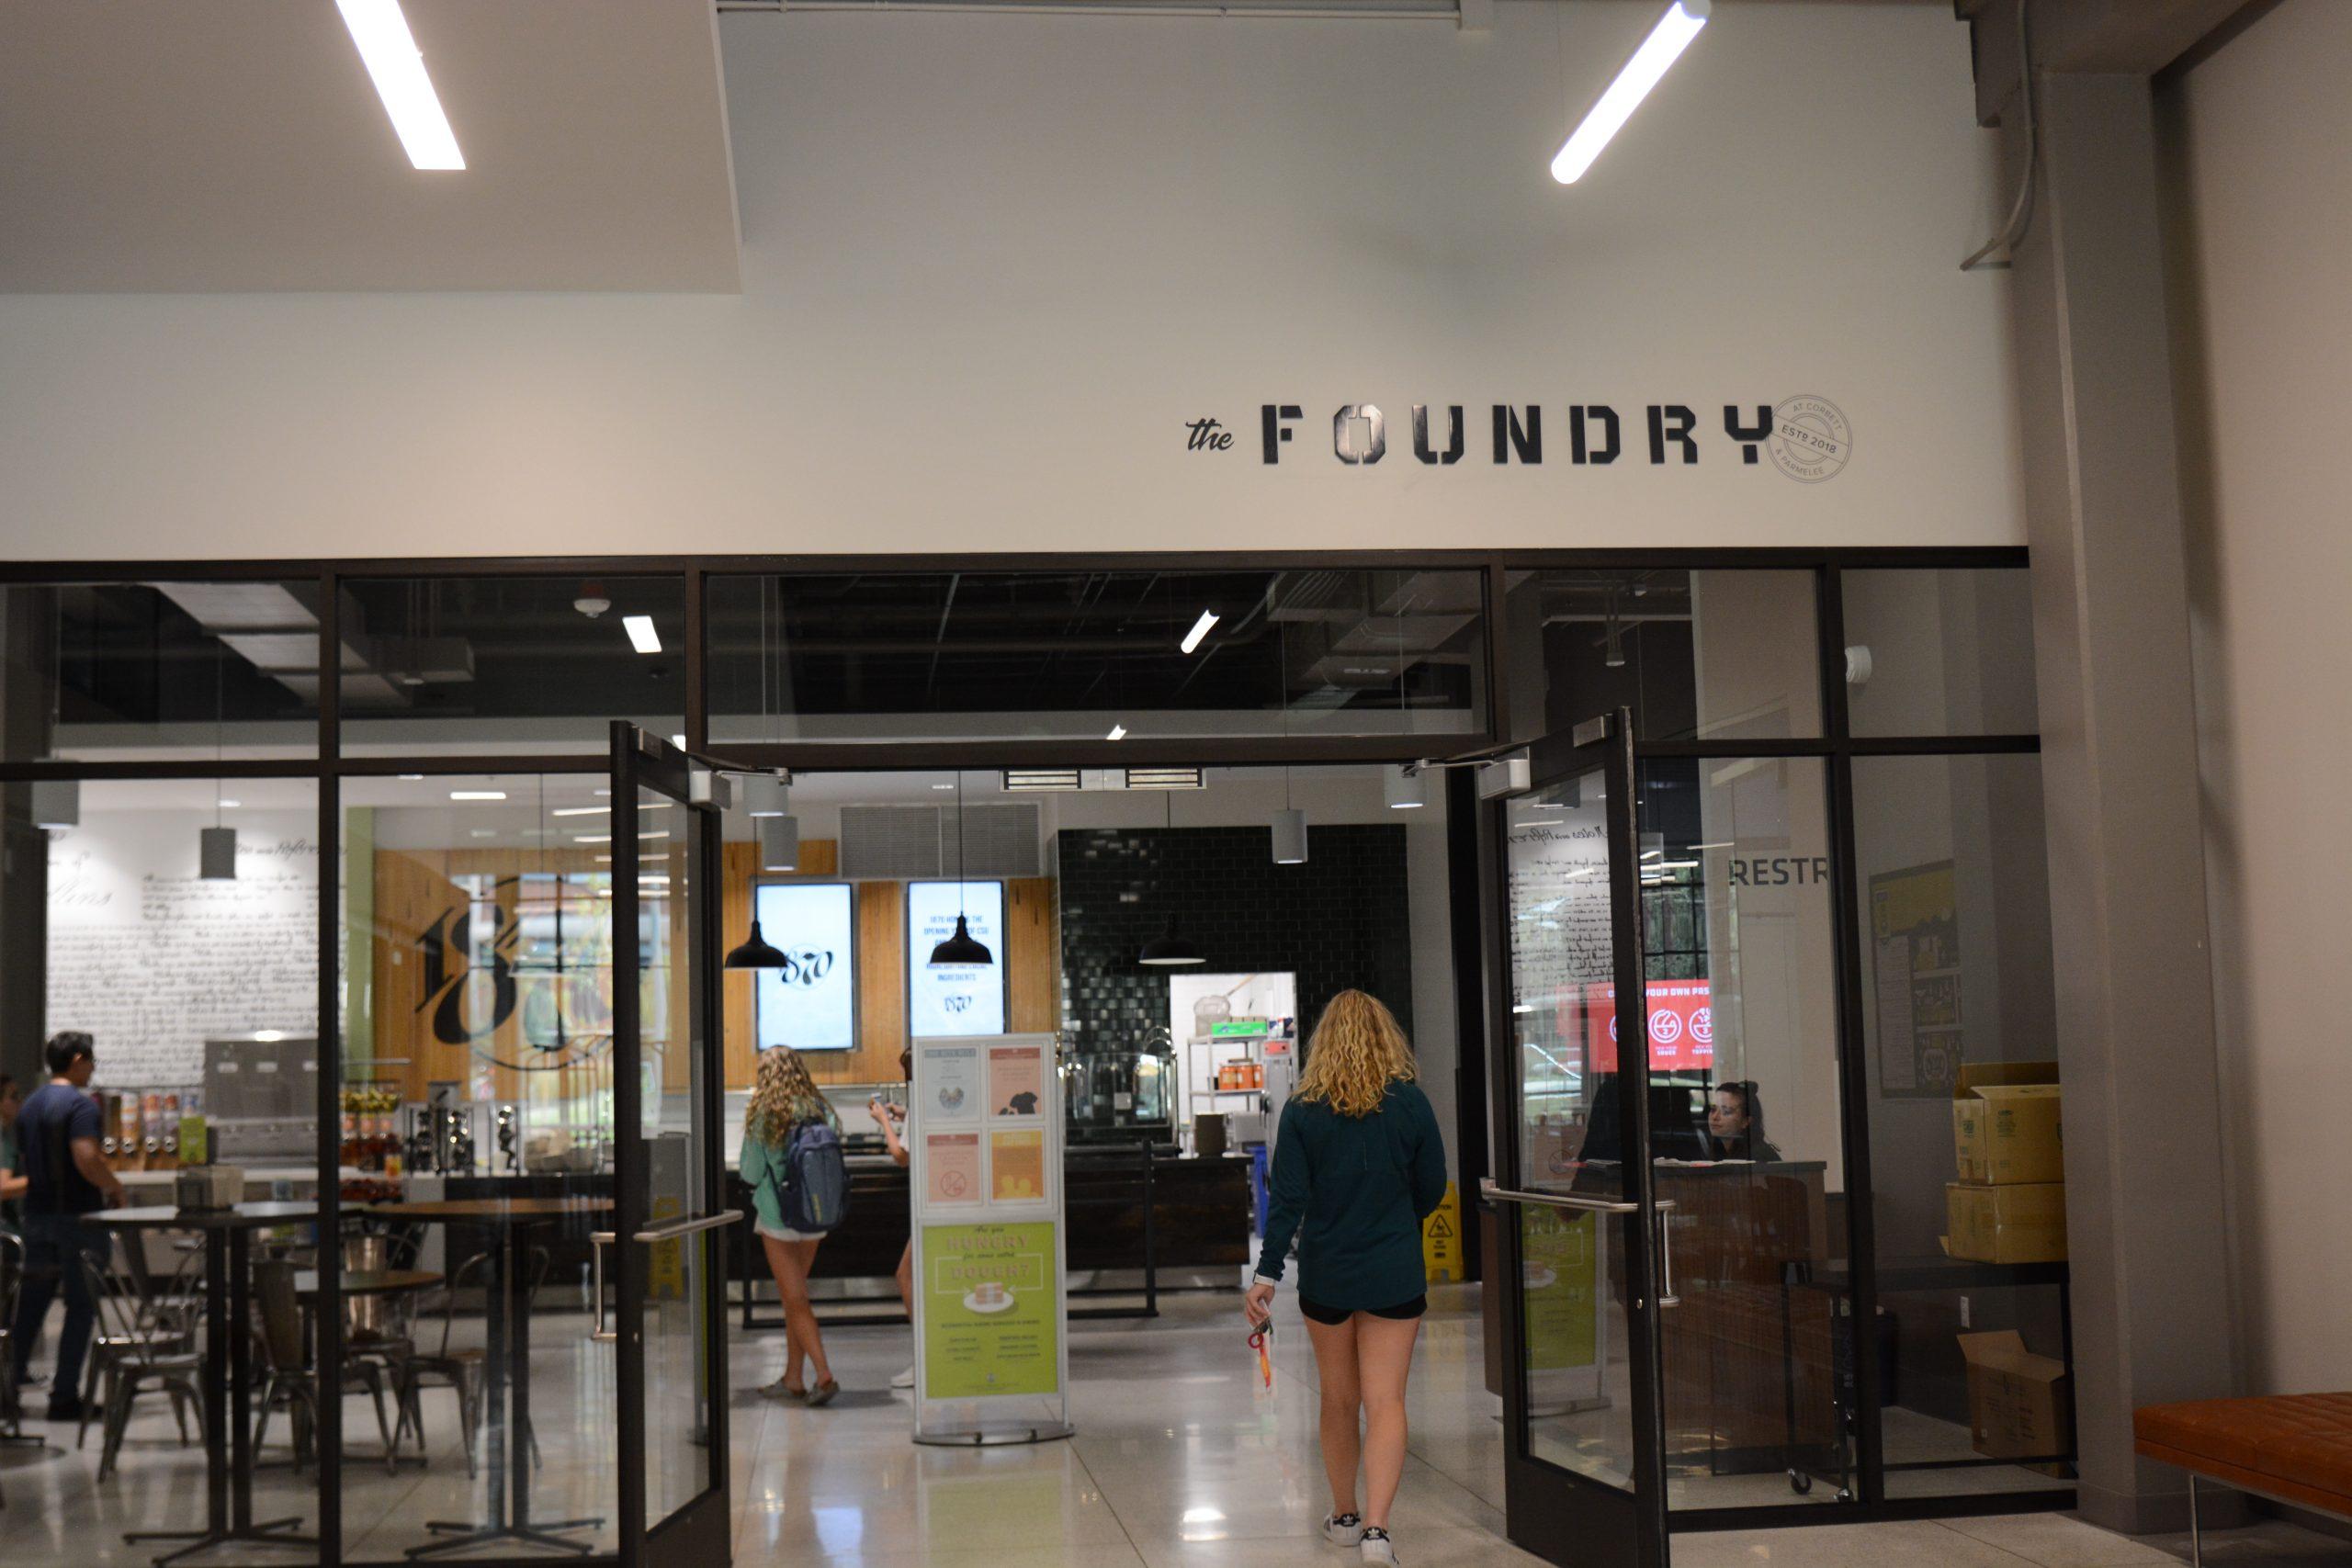 The+Foundry+offers+new+dining+hall+experience%2C+composting+opportunity